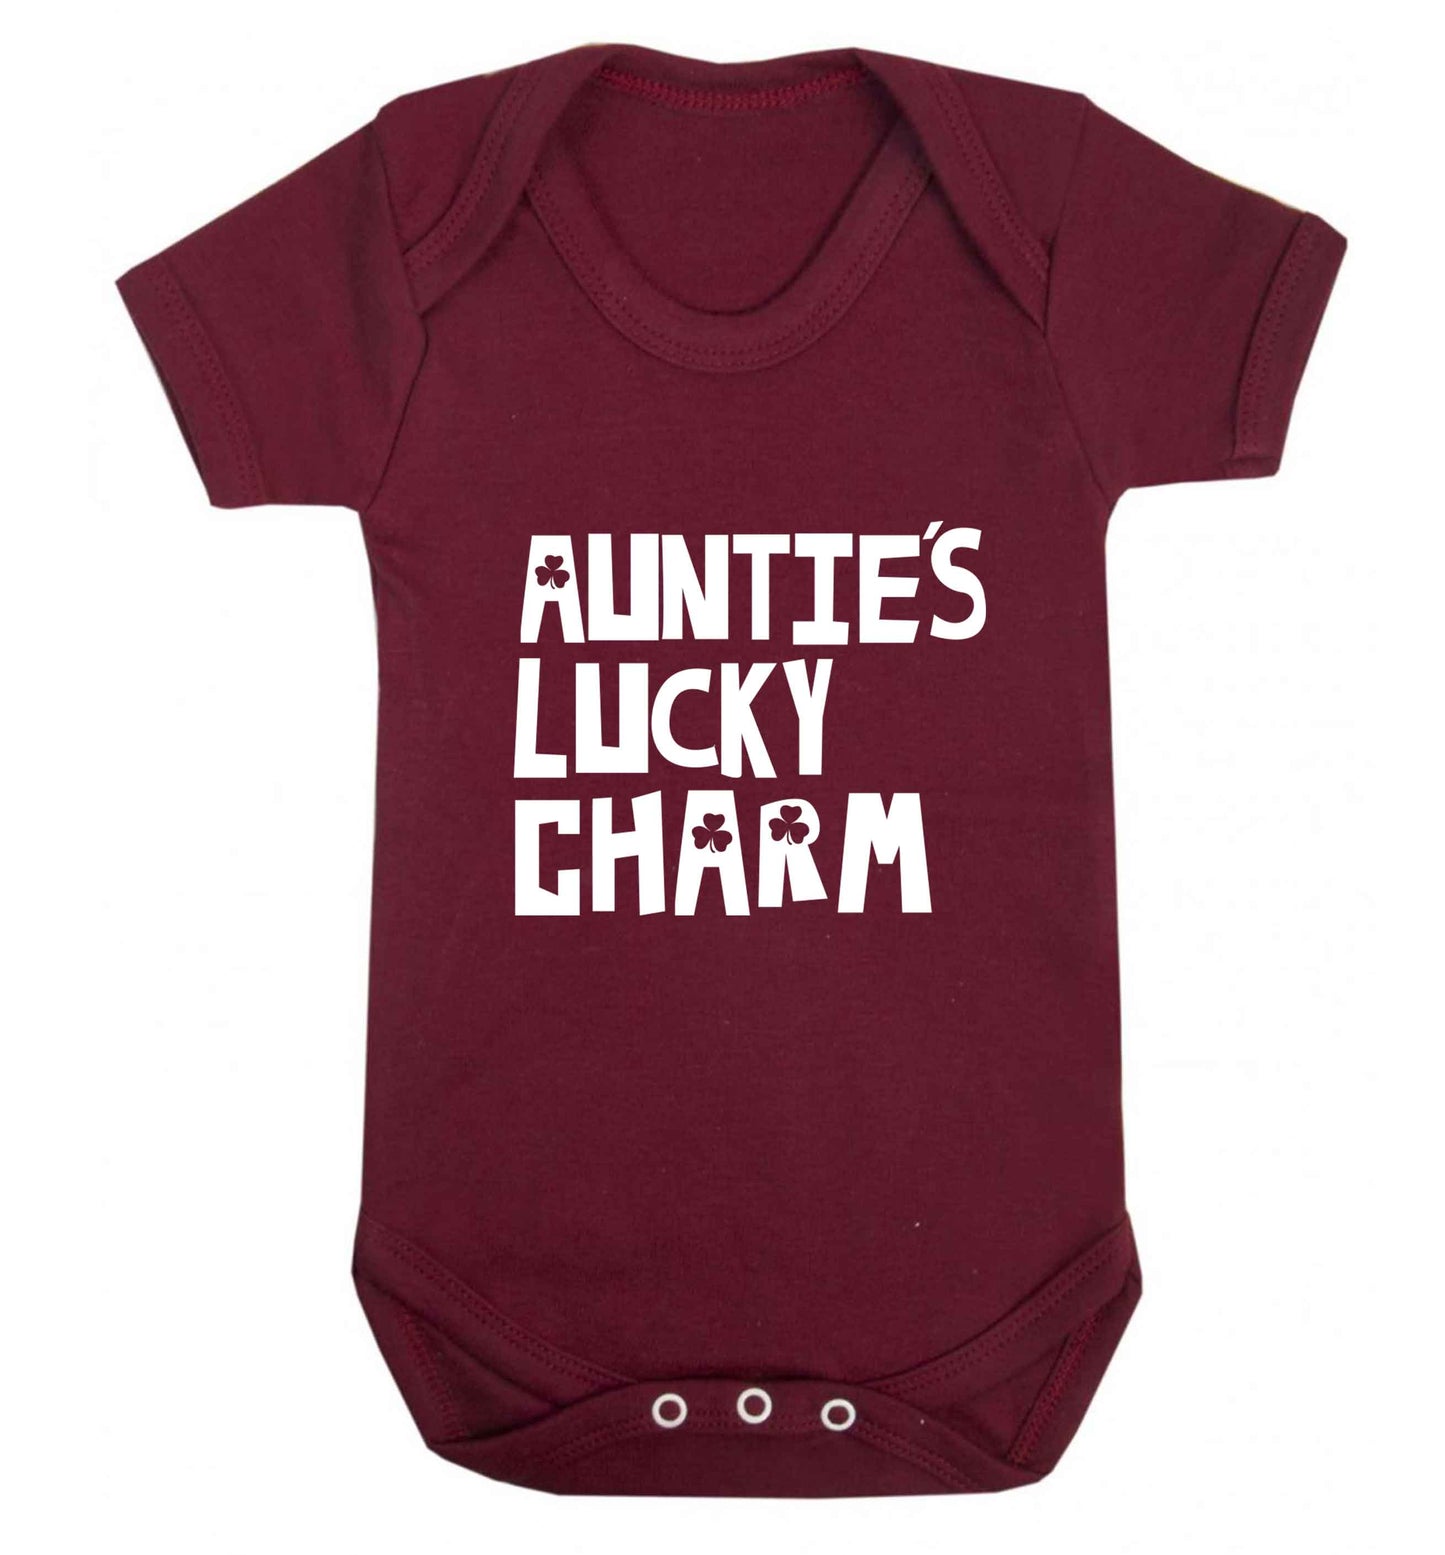 Auntie's lucky charm baby vest maroon 18-24 months